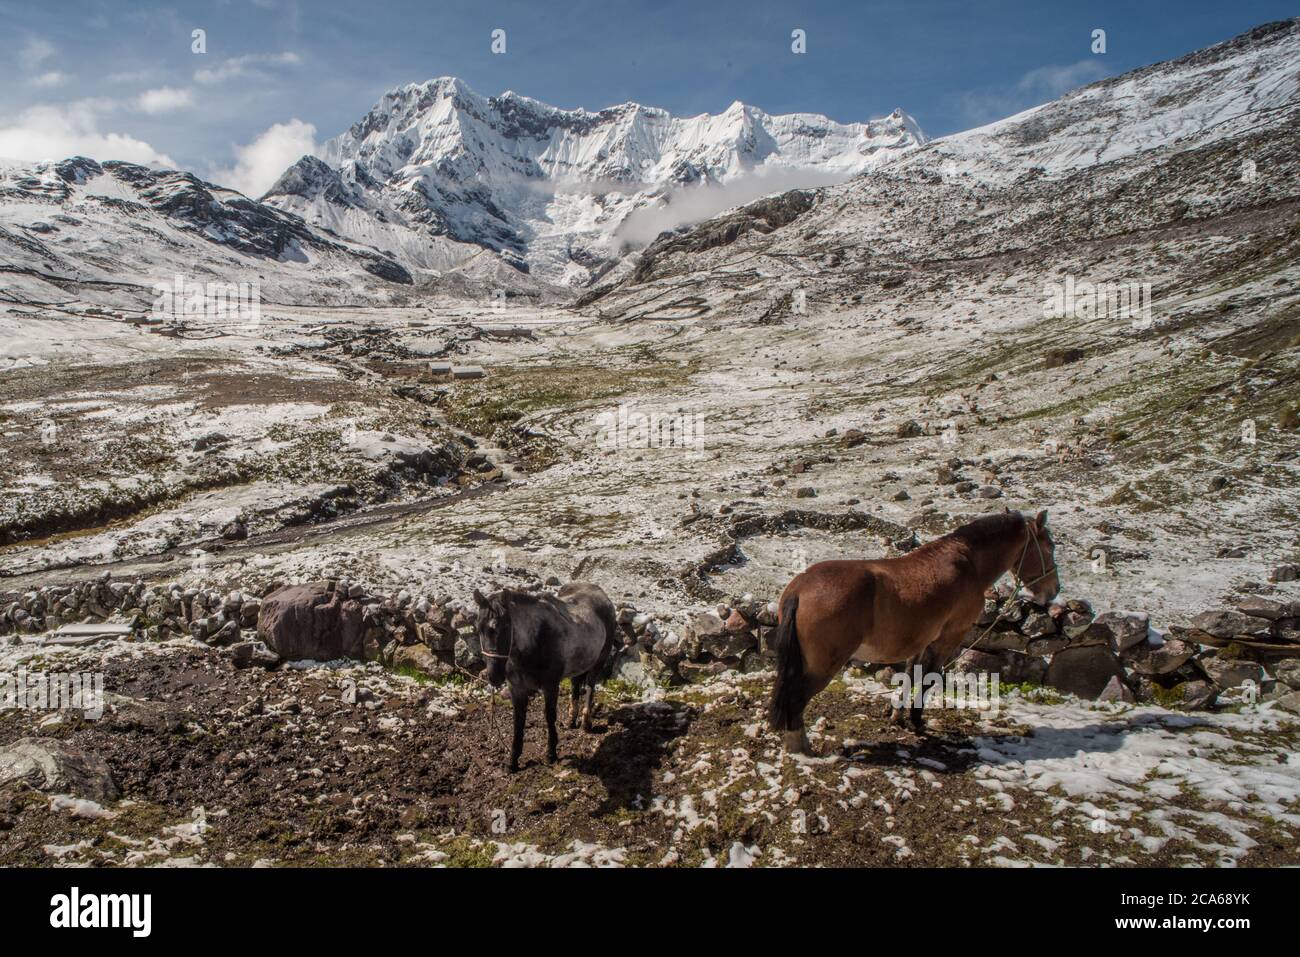 A blizzard swept in and morning arrives with the Andean landscape of the Cordillera Vilcanota covered in snow. 2 horses stand outside. Stock Photo